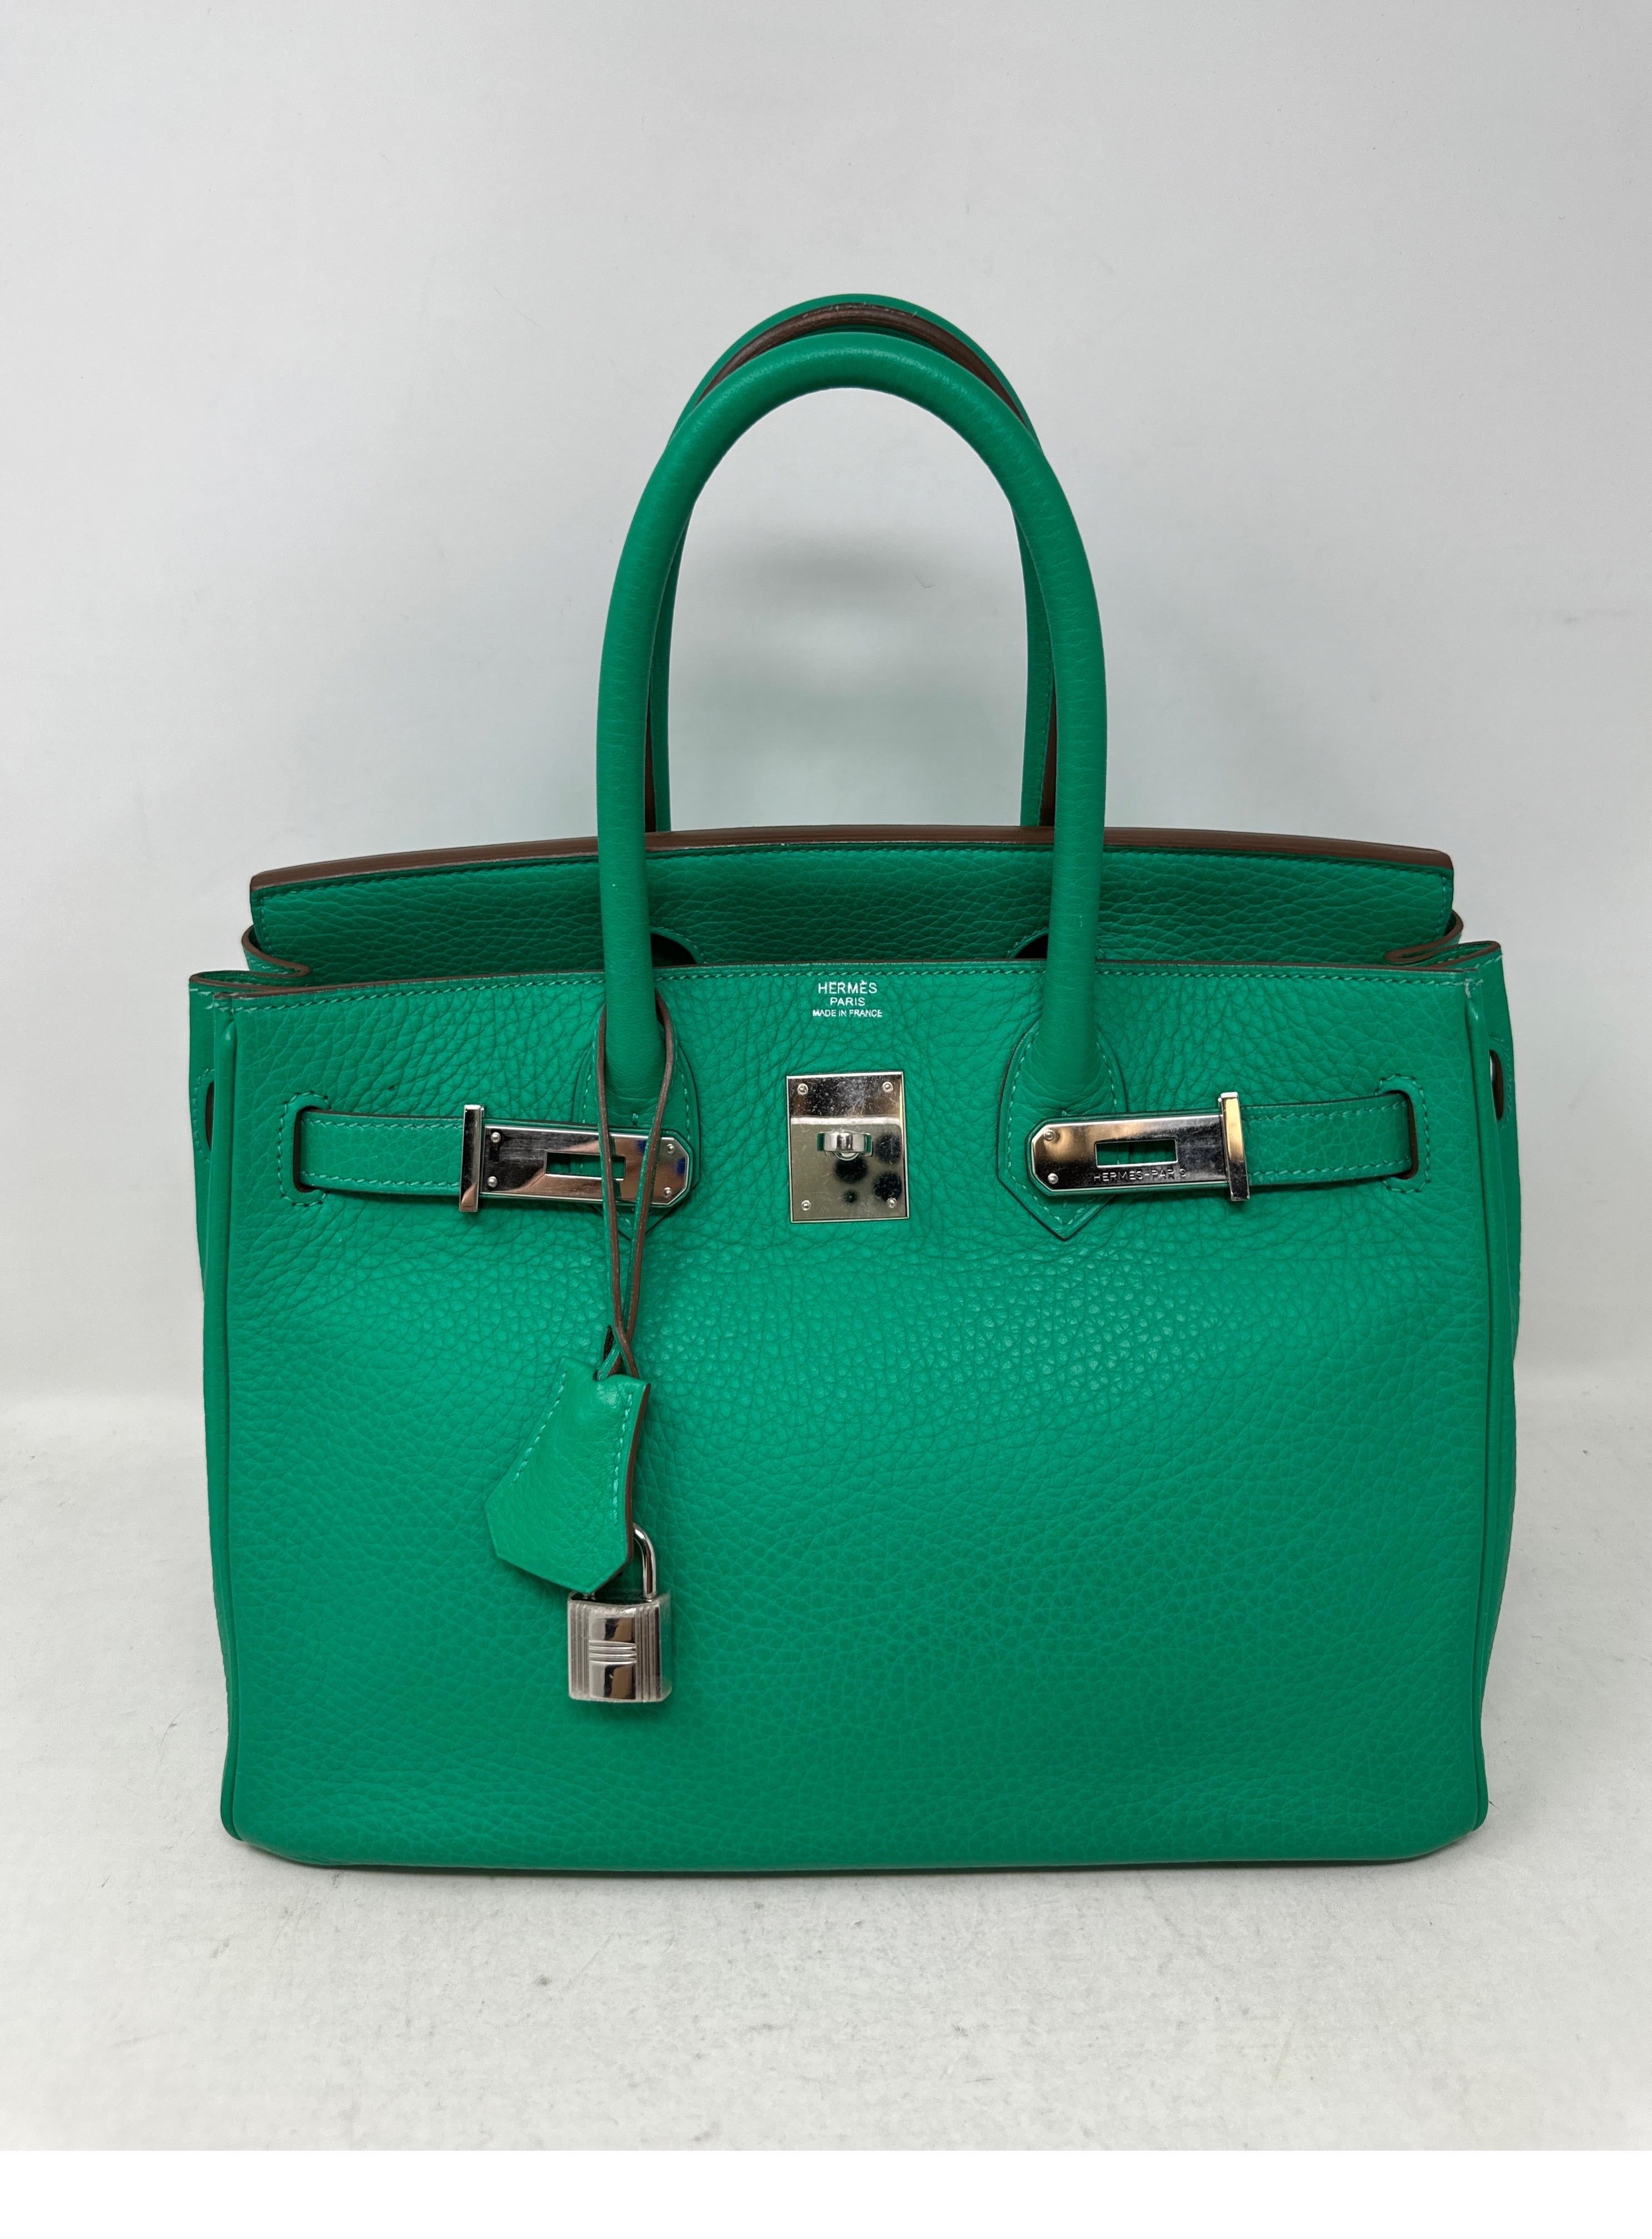 Hermes Menthe Birkin 30 Bag  In Good Condition For Sale In Athens, GA